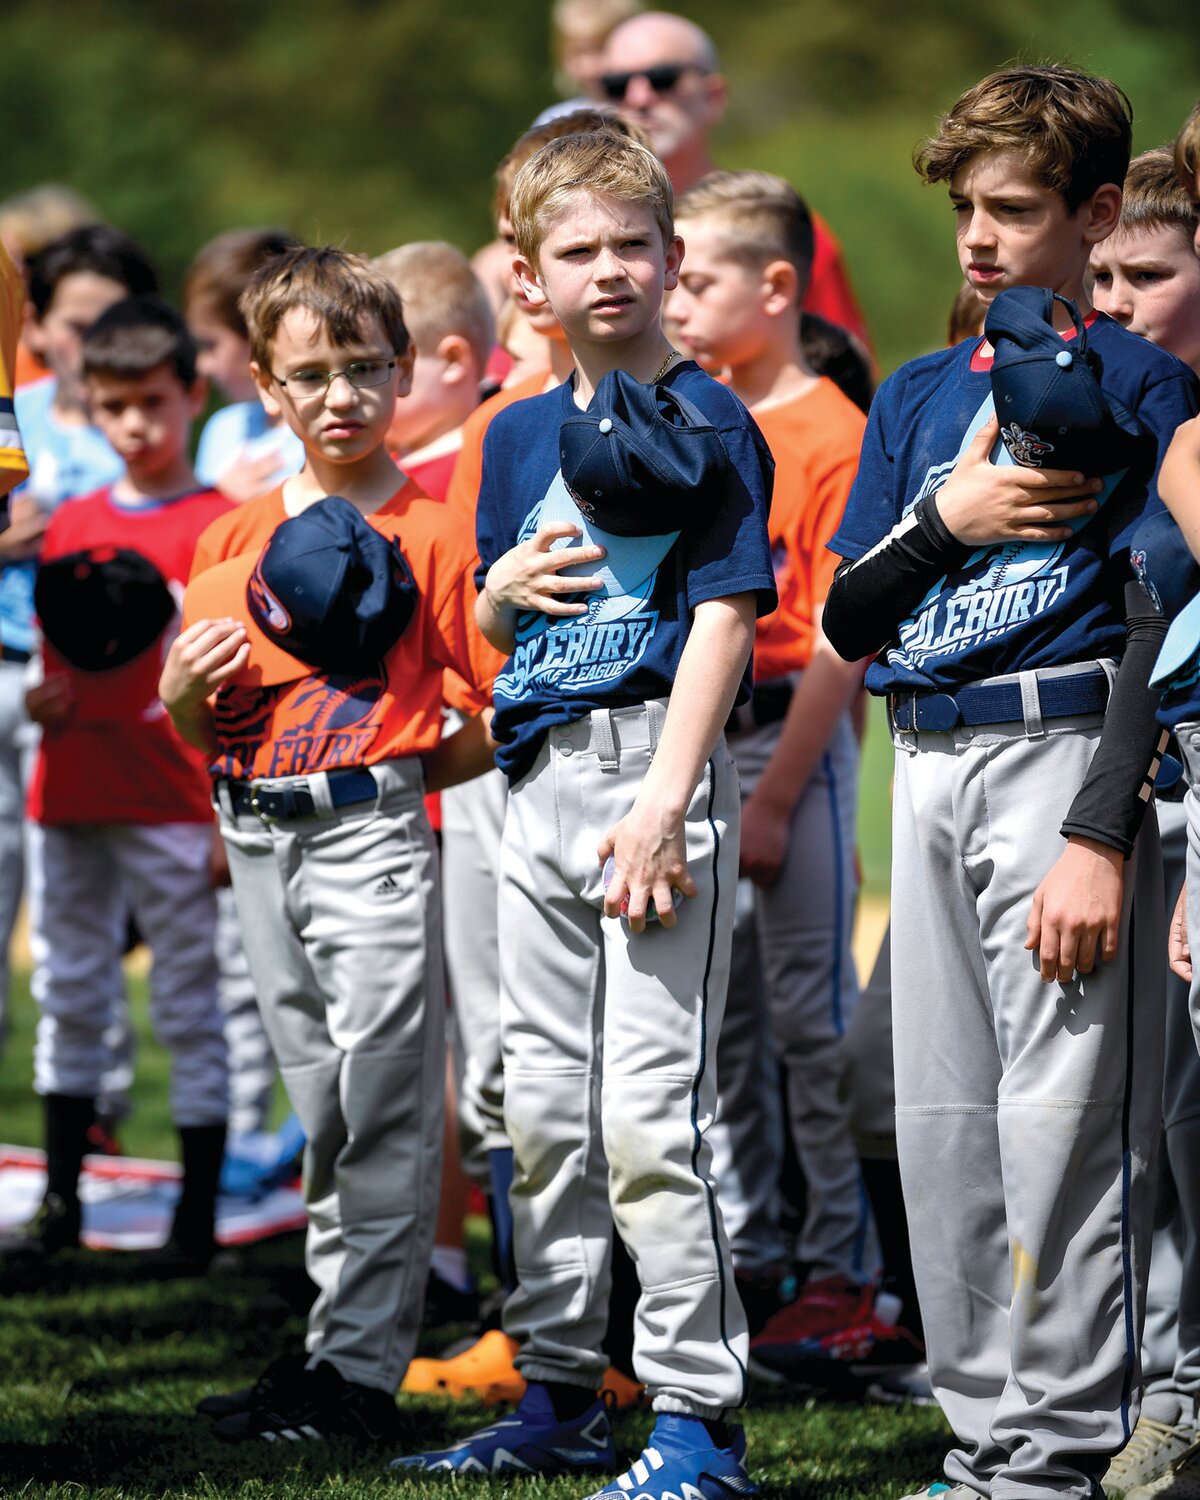 The 10U baseball teams during the national anthem.